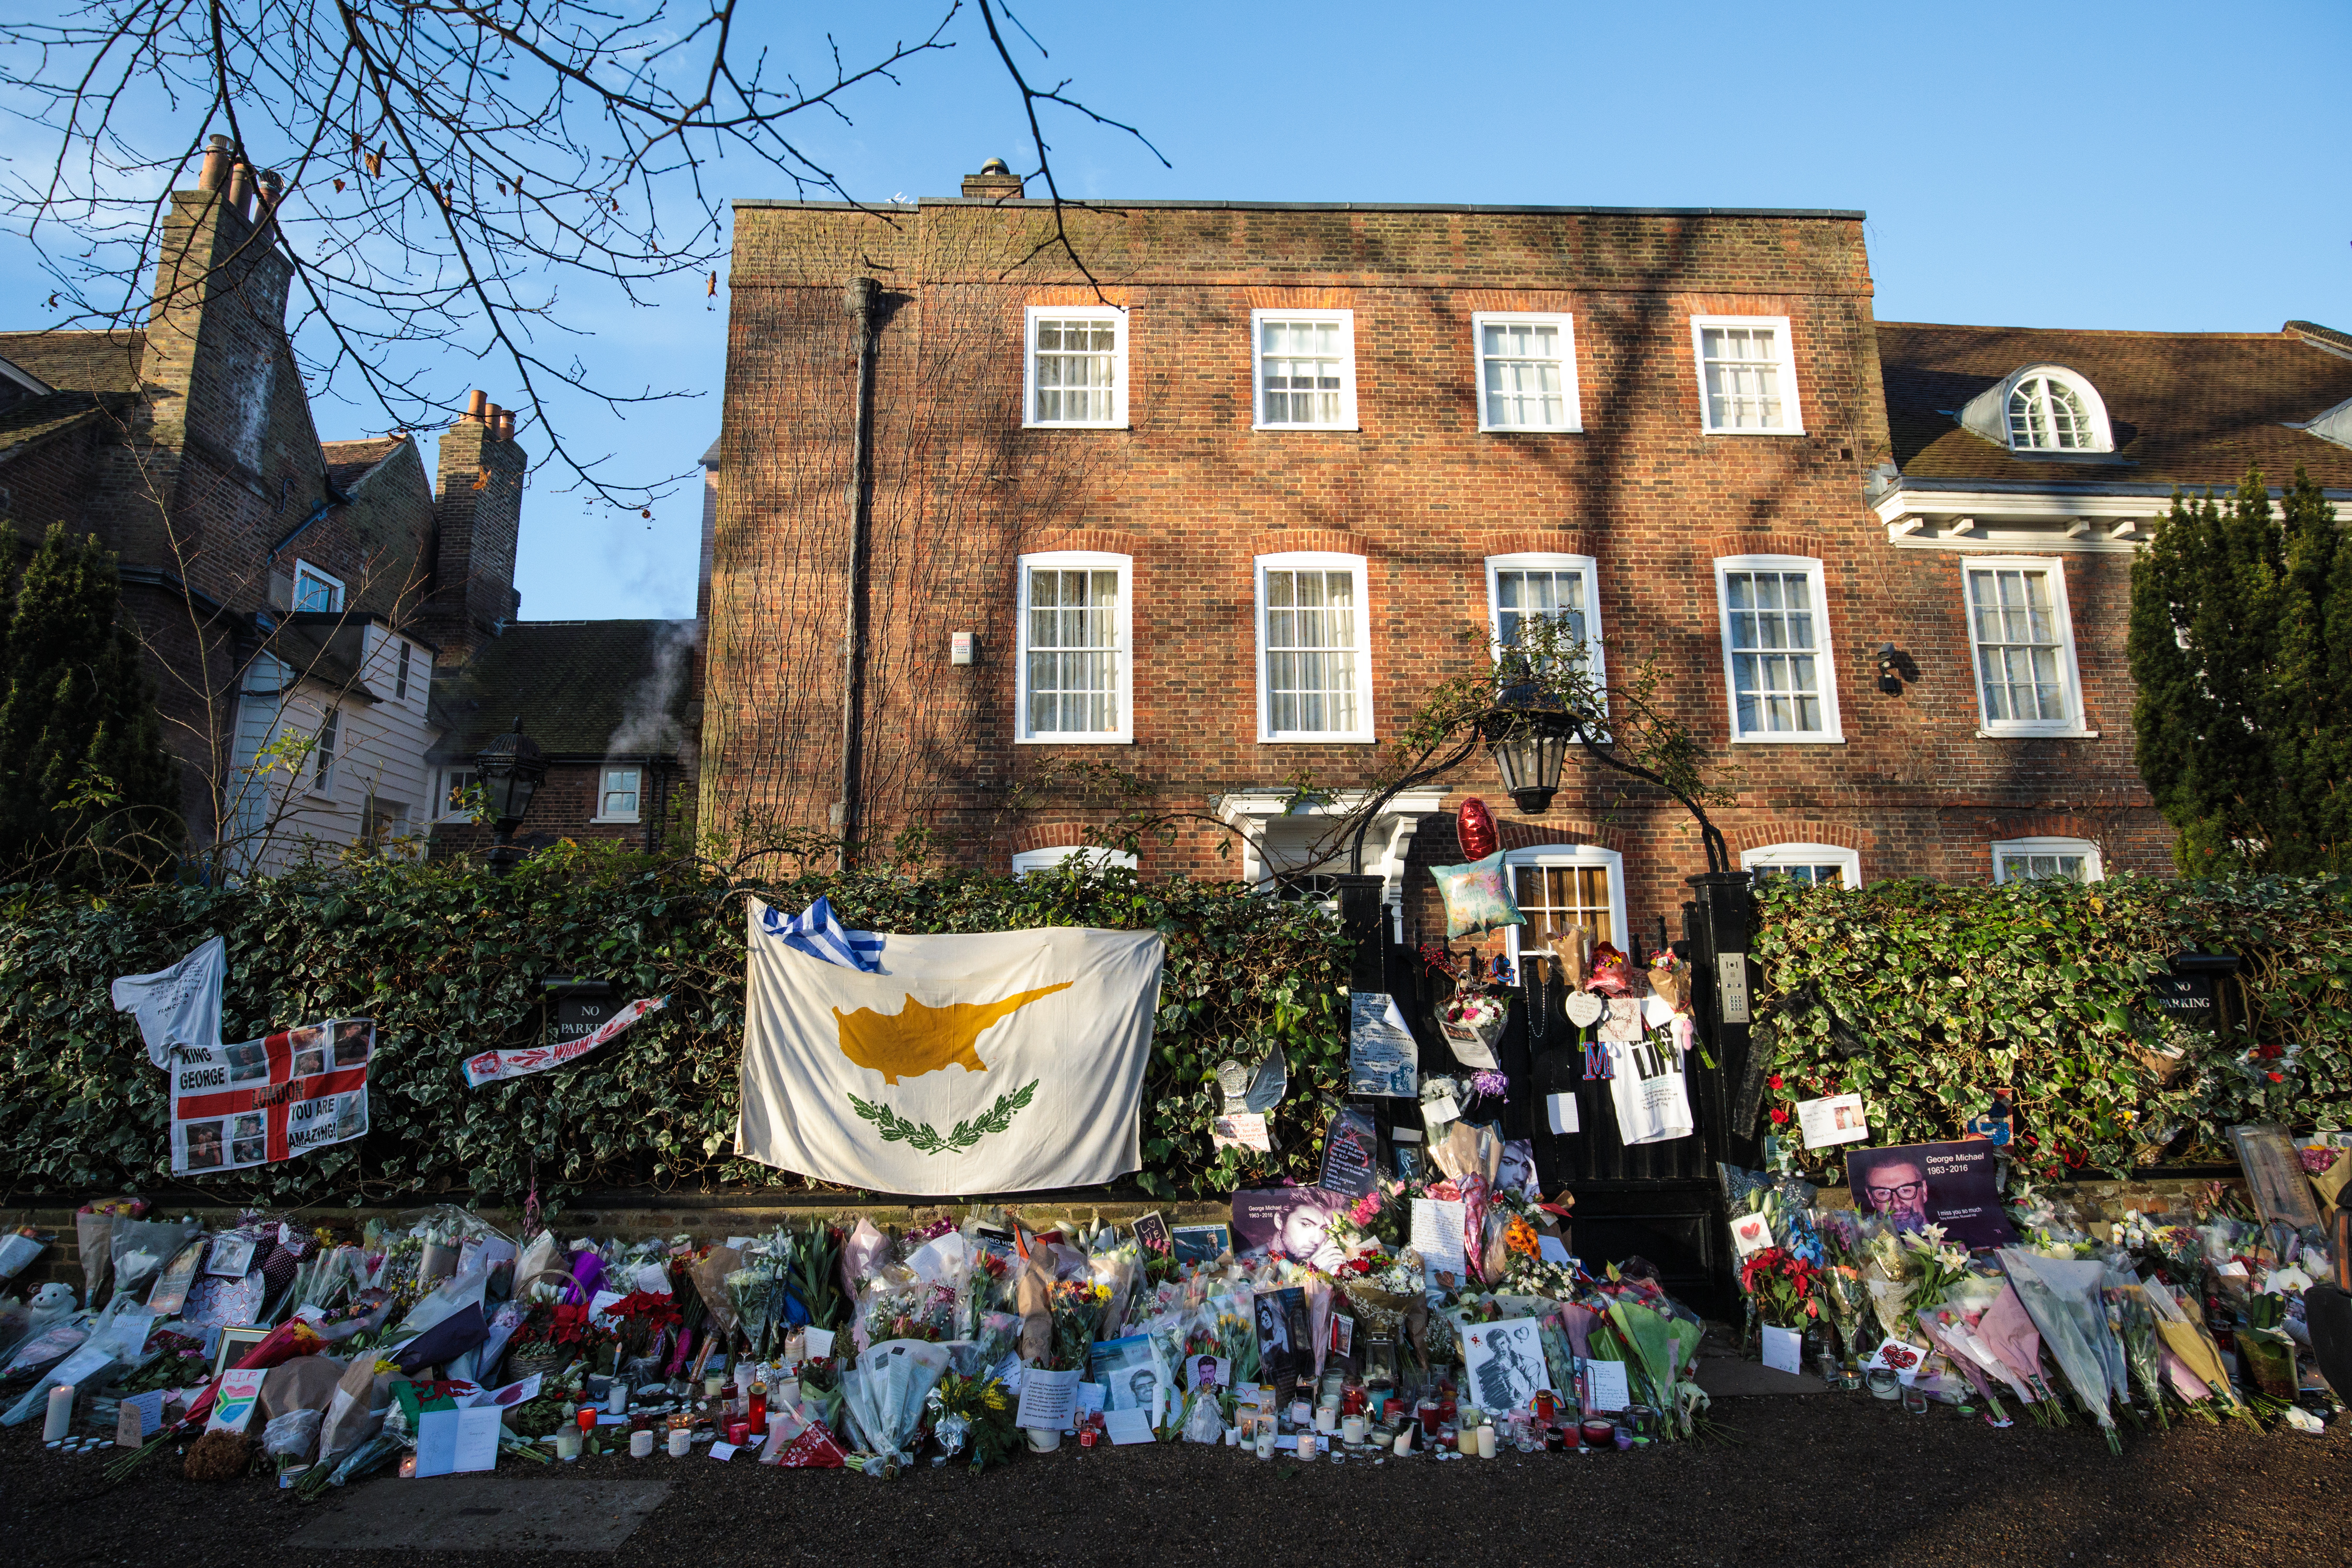 Tributes of flowers, photographs, and candles pictured outside the home of George Michael in The Grove, Highgate on December 28, 2016 in London, England | Source: Getty Images